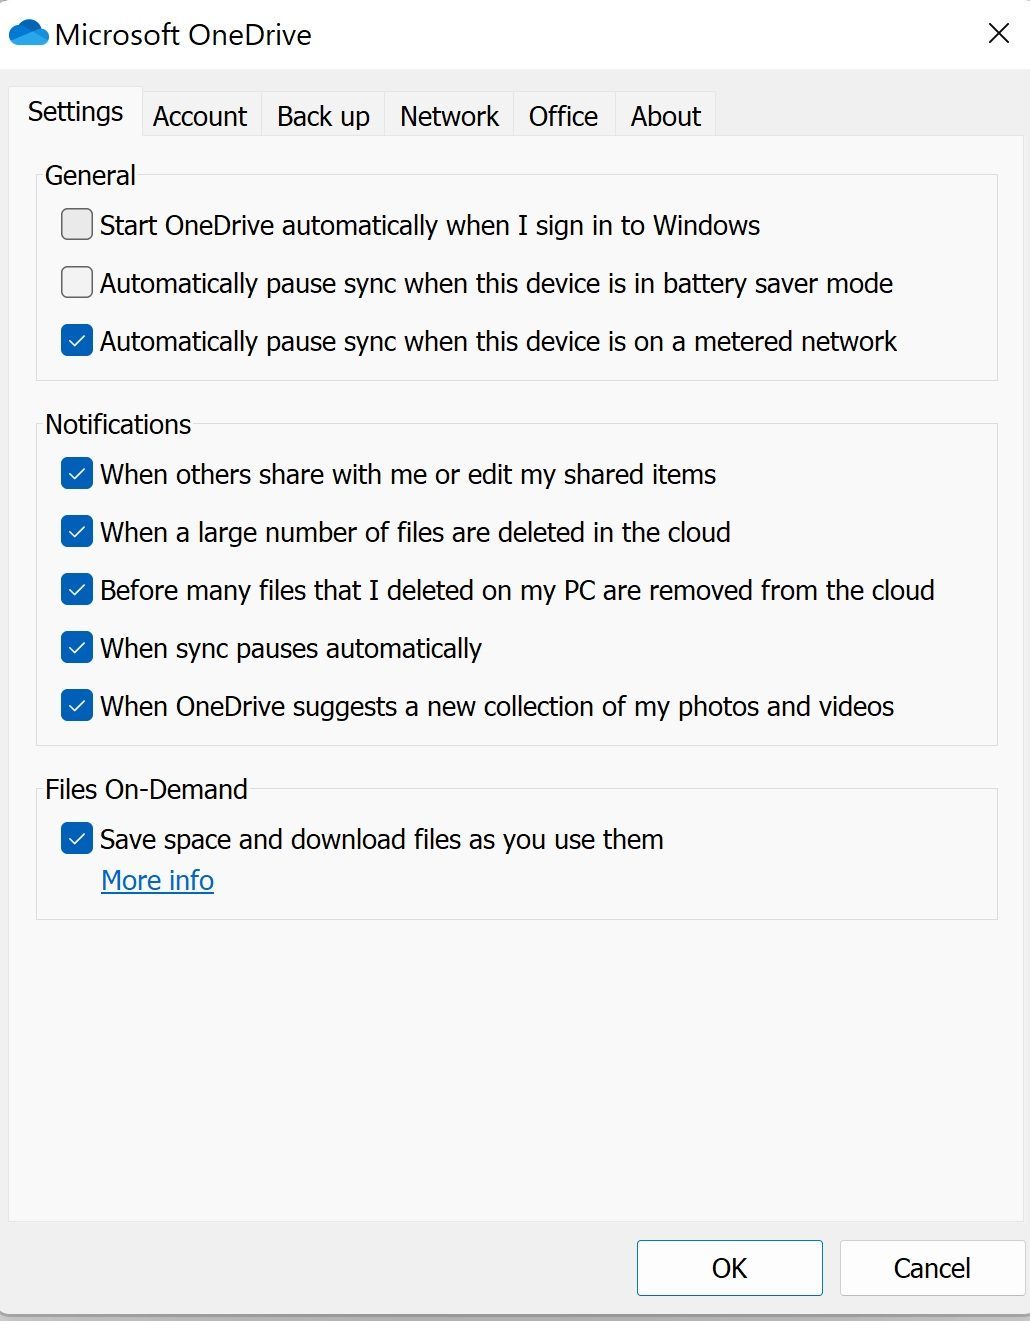 onedrive settings tab to stop it from automatically starting